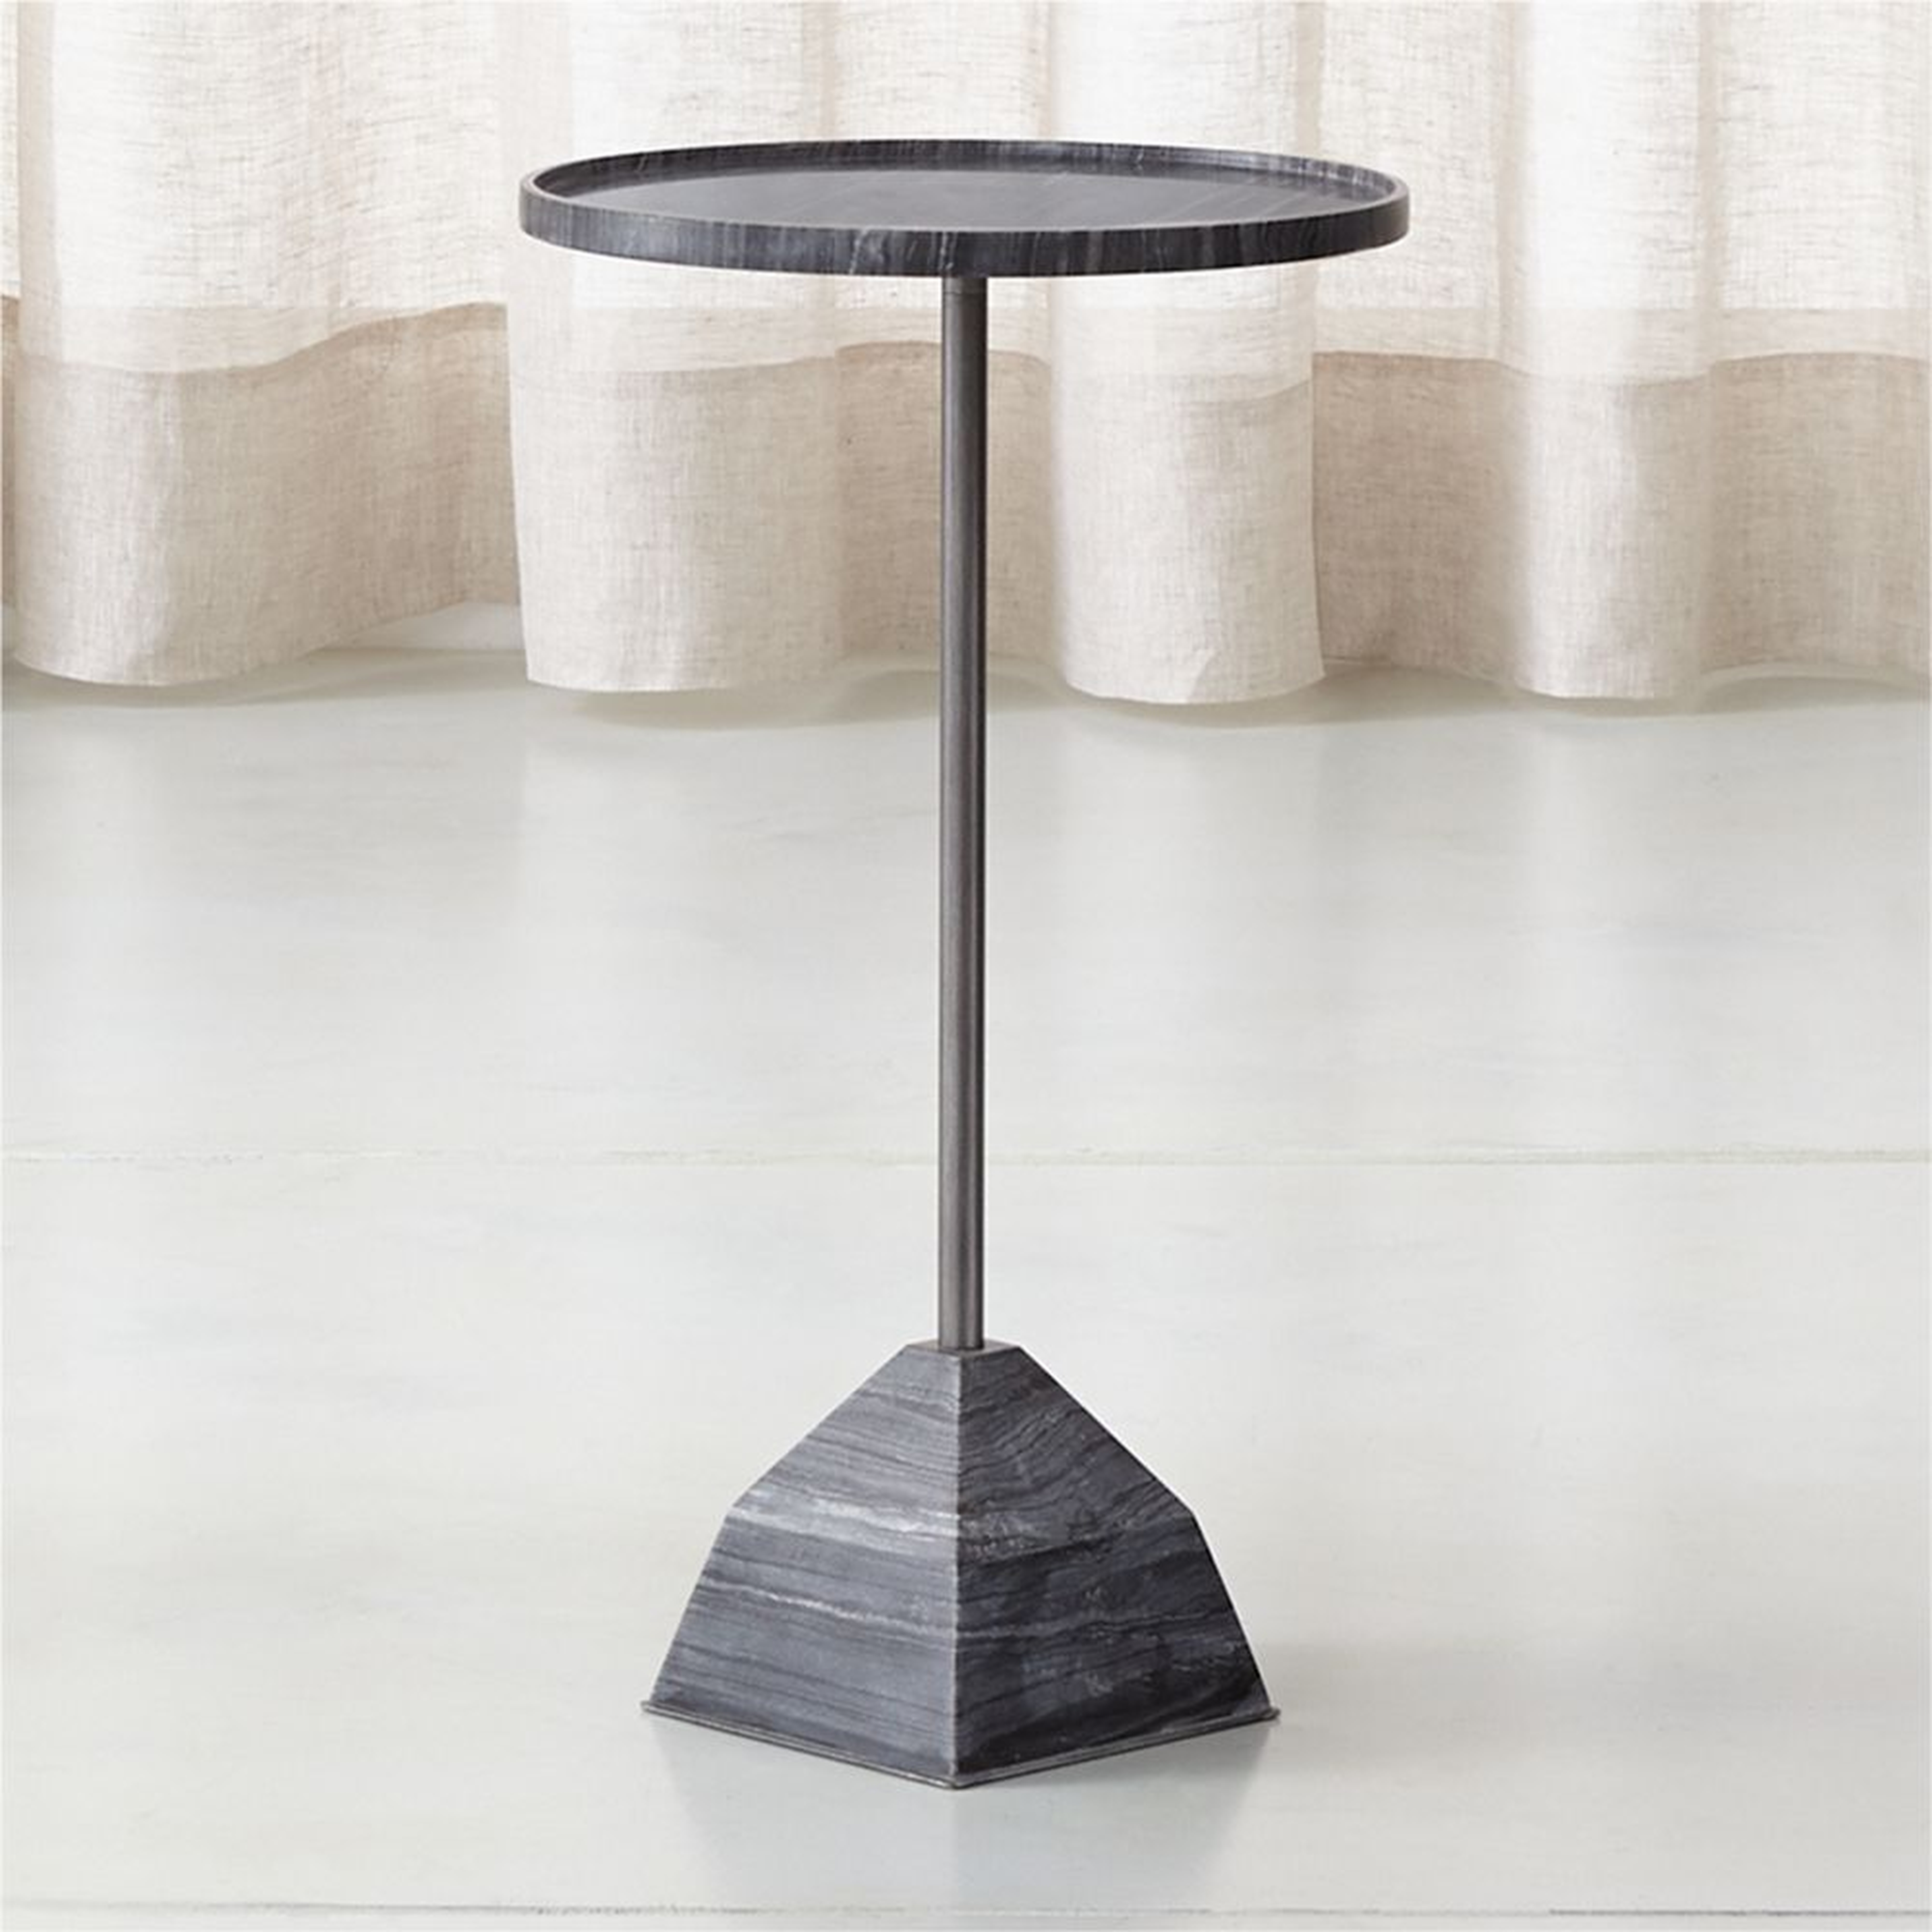 Prost Medium Marble Round Drink Table - Crate and Barrel